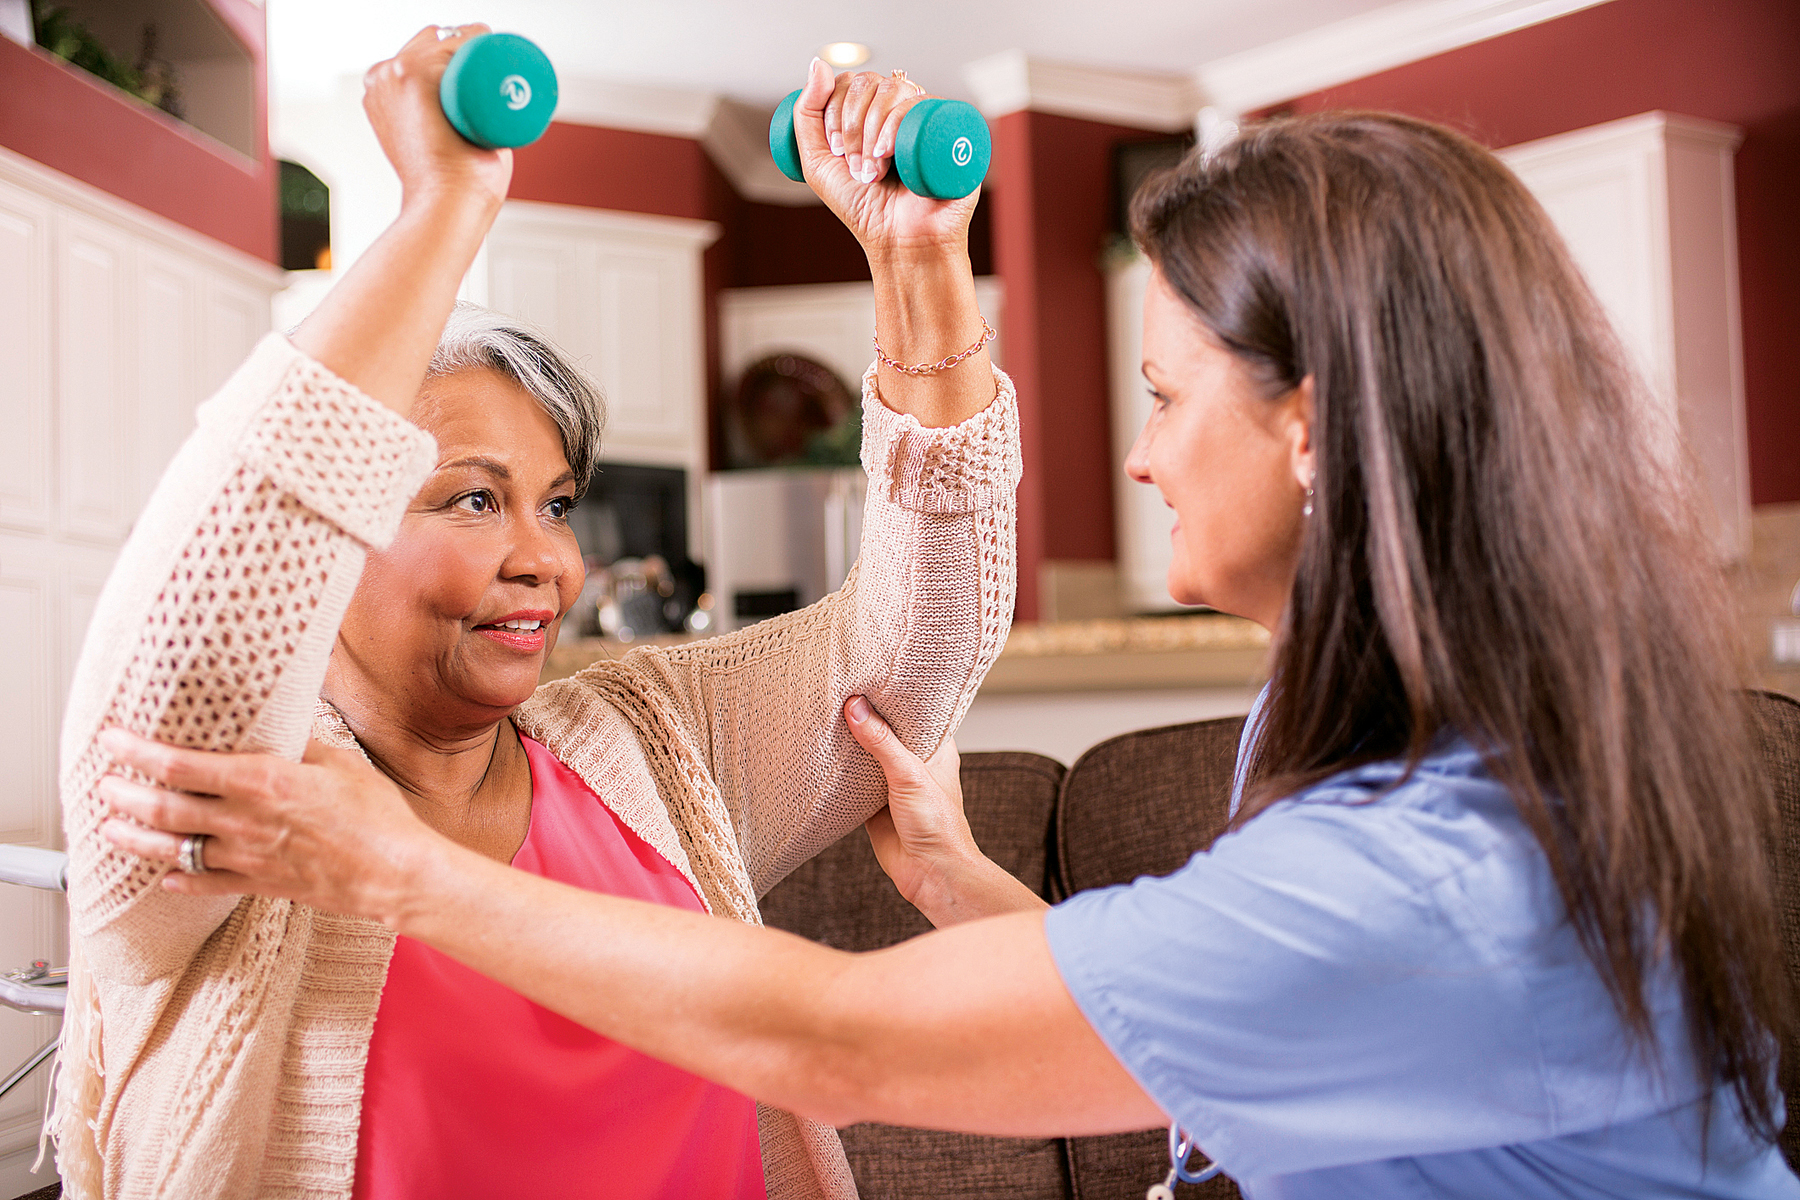 Caring, Latin descent home healthcare nurse conducts physical therapy exercises with African descent senior adult patient at home, assisted living, or nursing home setting. She helps her with arm strengthening exercises using a dumbbell. Kitchen background.